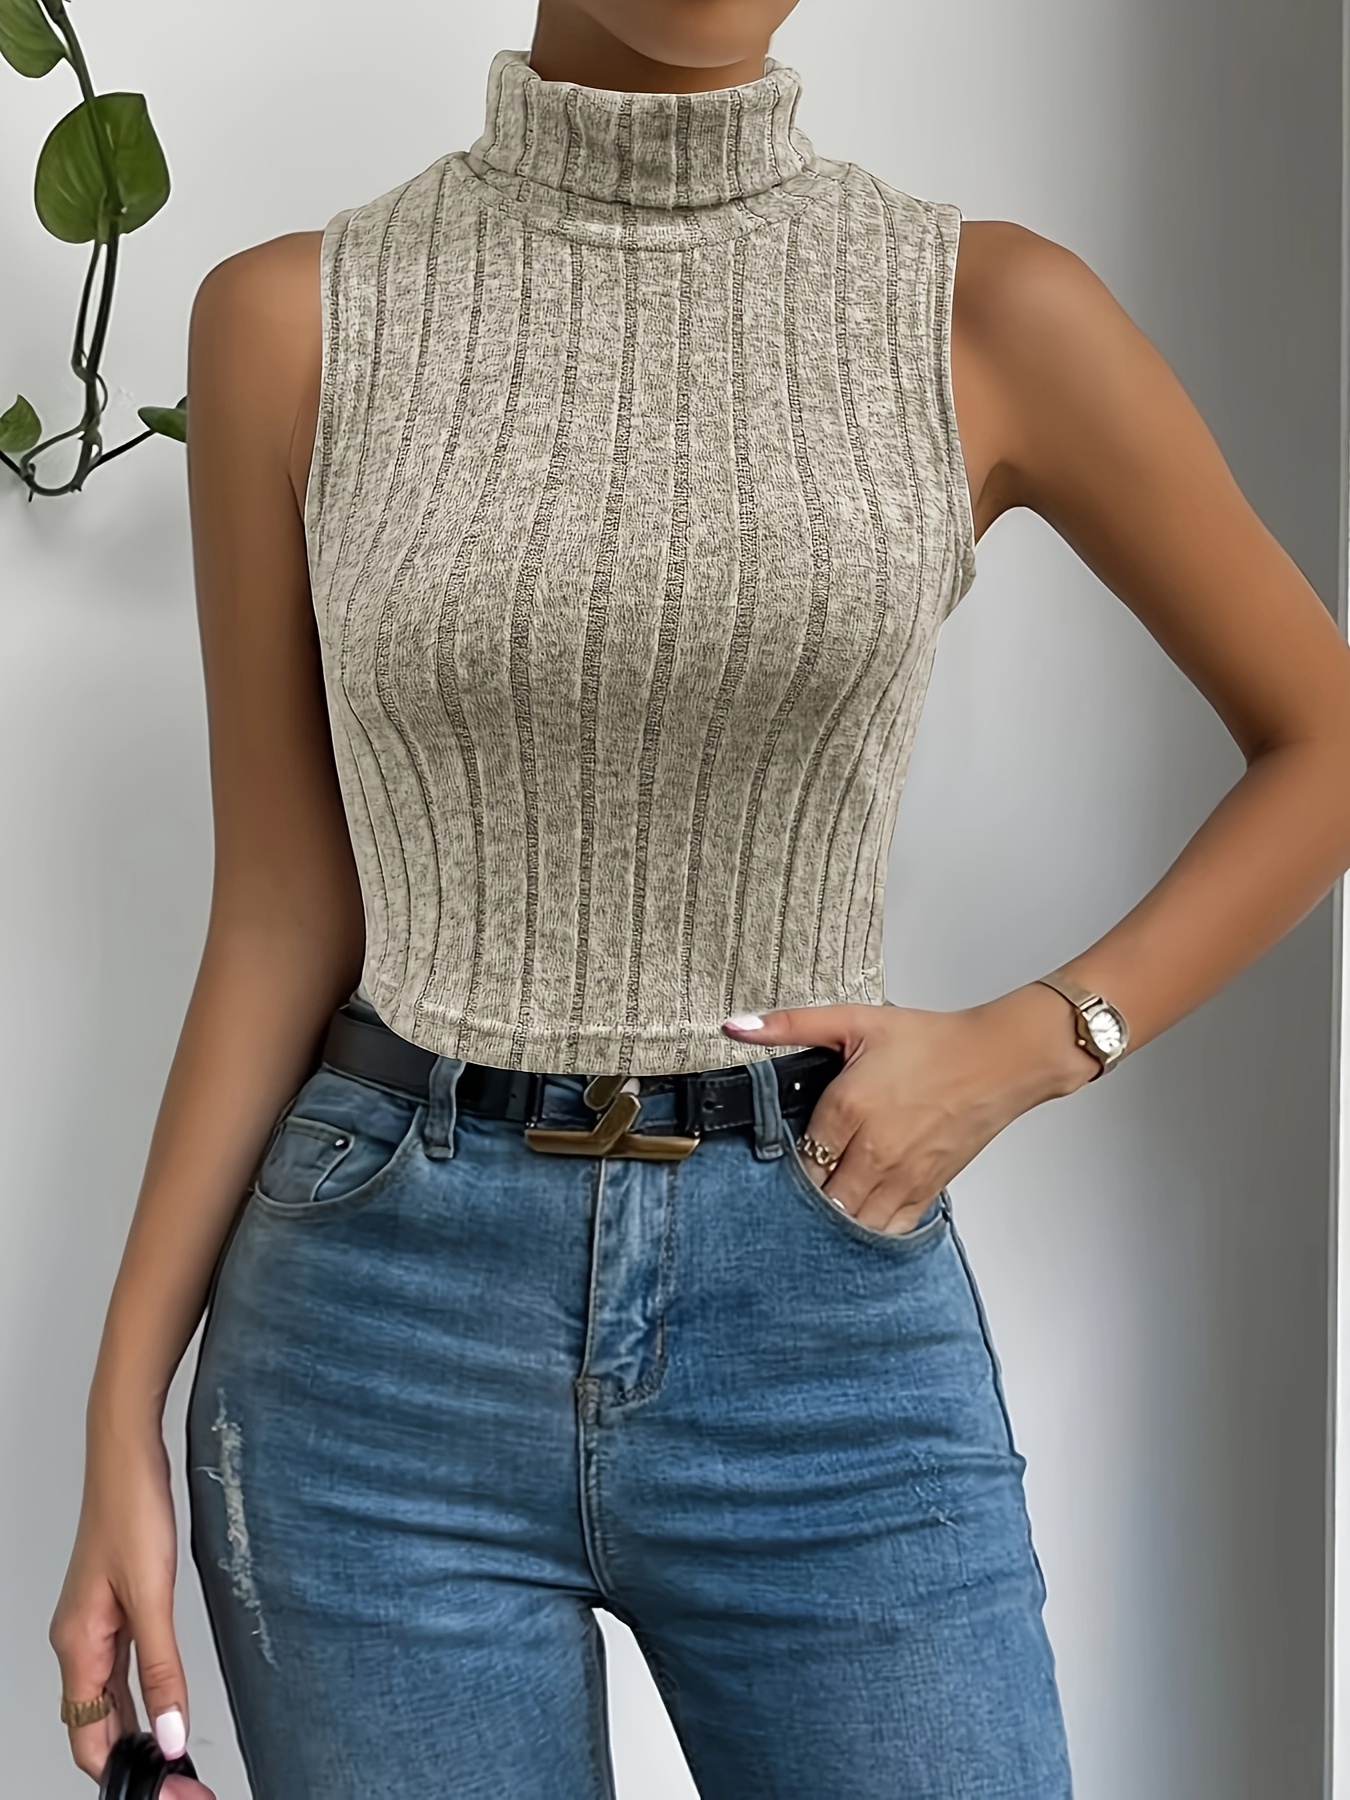 Solid Casual Two piece Set Split Sleeveless Halter Neck Tops